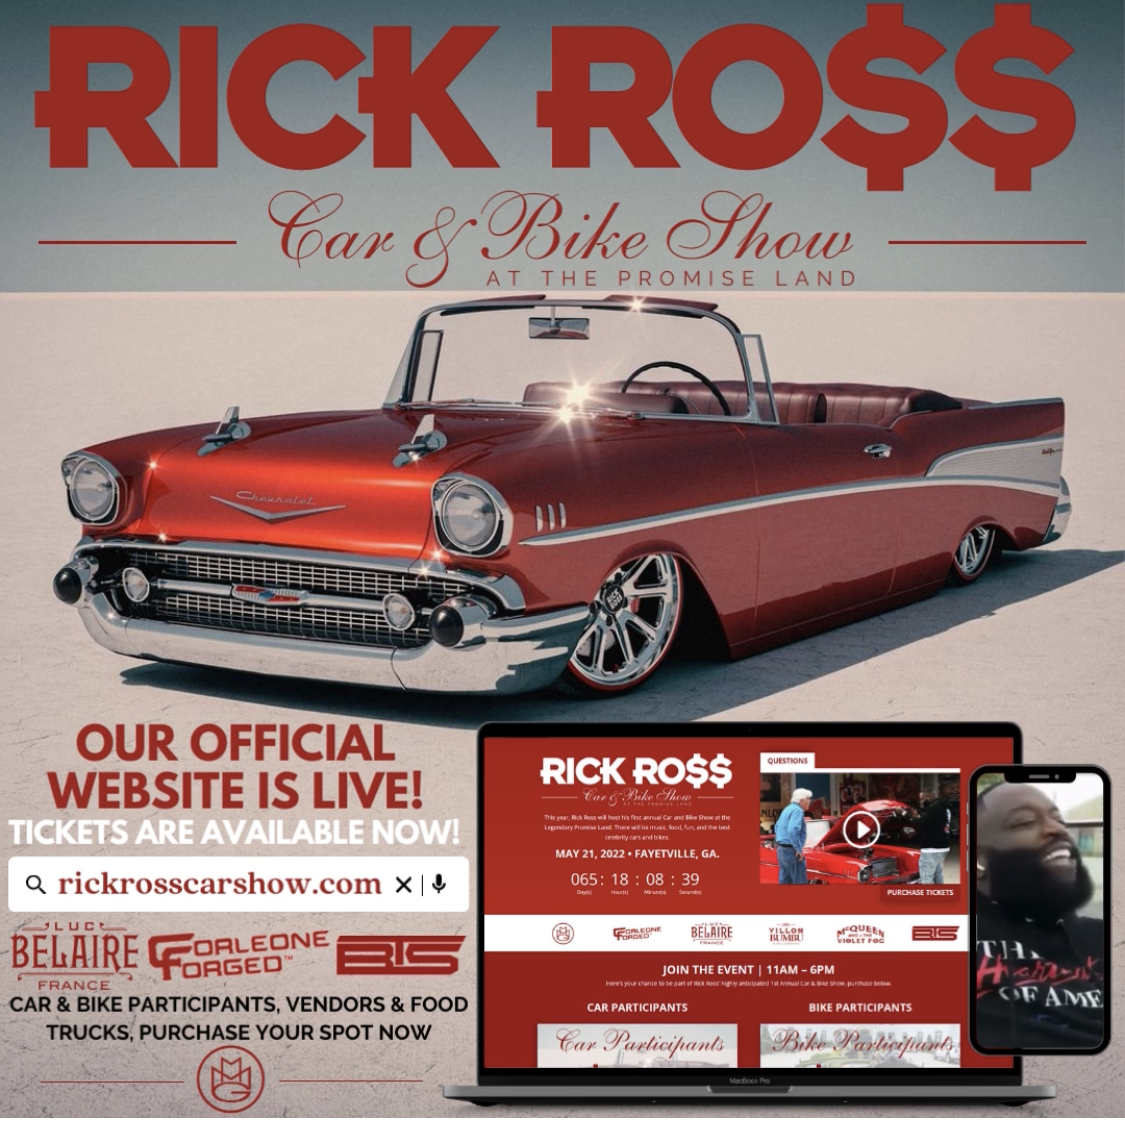 Rick Ross Car Show Ticket Prices How do you Price a Switches?